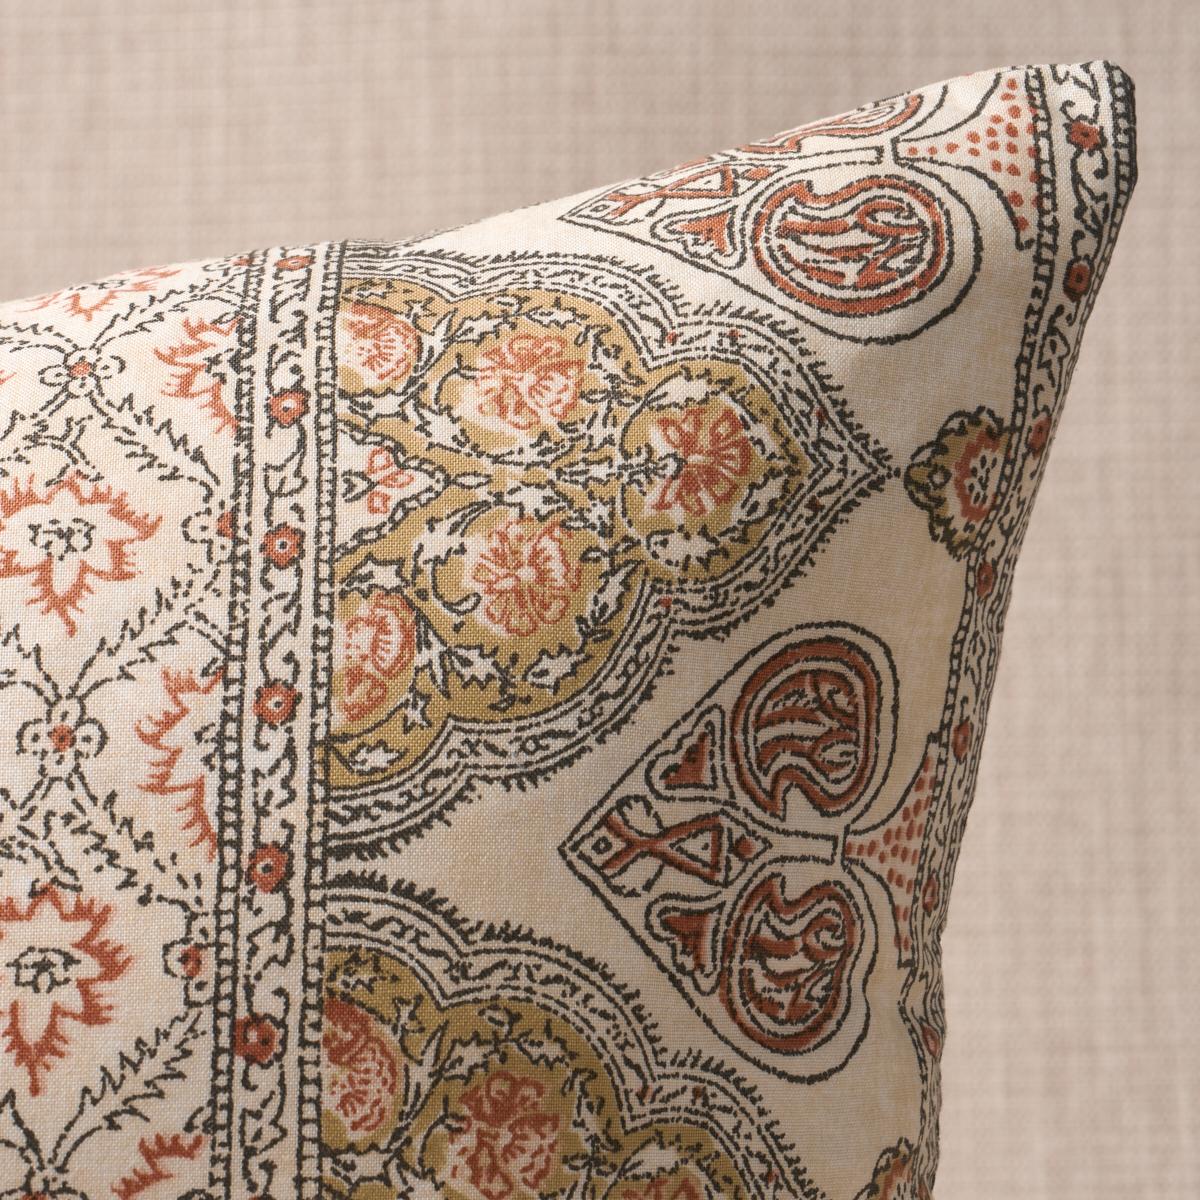 This pillow features Tombay with a knife edge finish. Tombay’s delicate vine stripe and intricate borders were inspired by a vintage document fabric. Pillow includes a feather/down fill insert and hidden zipper closure.